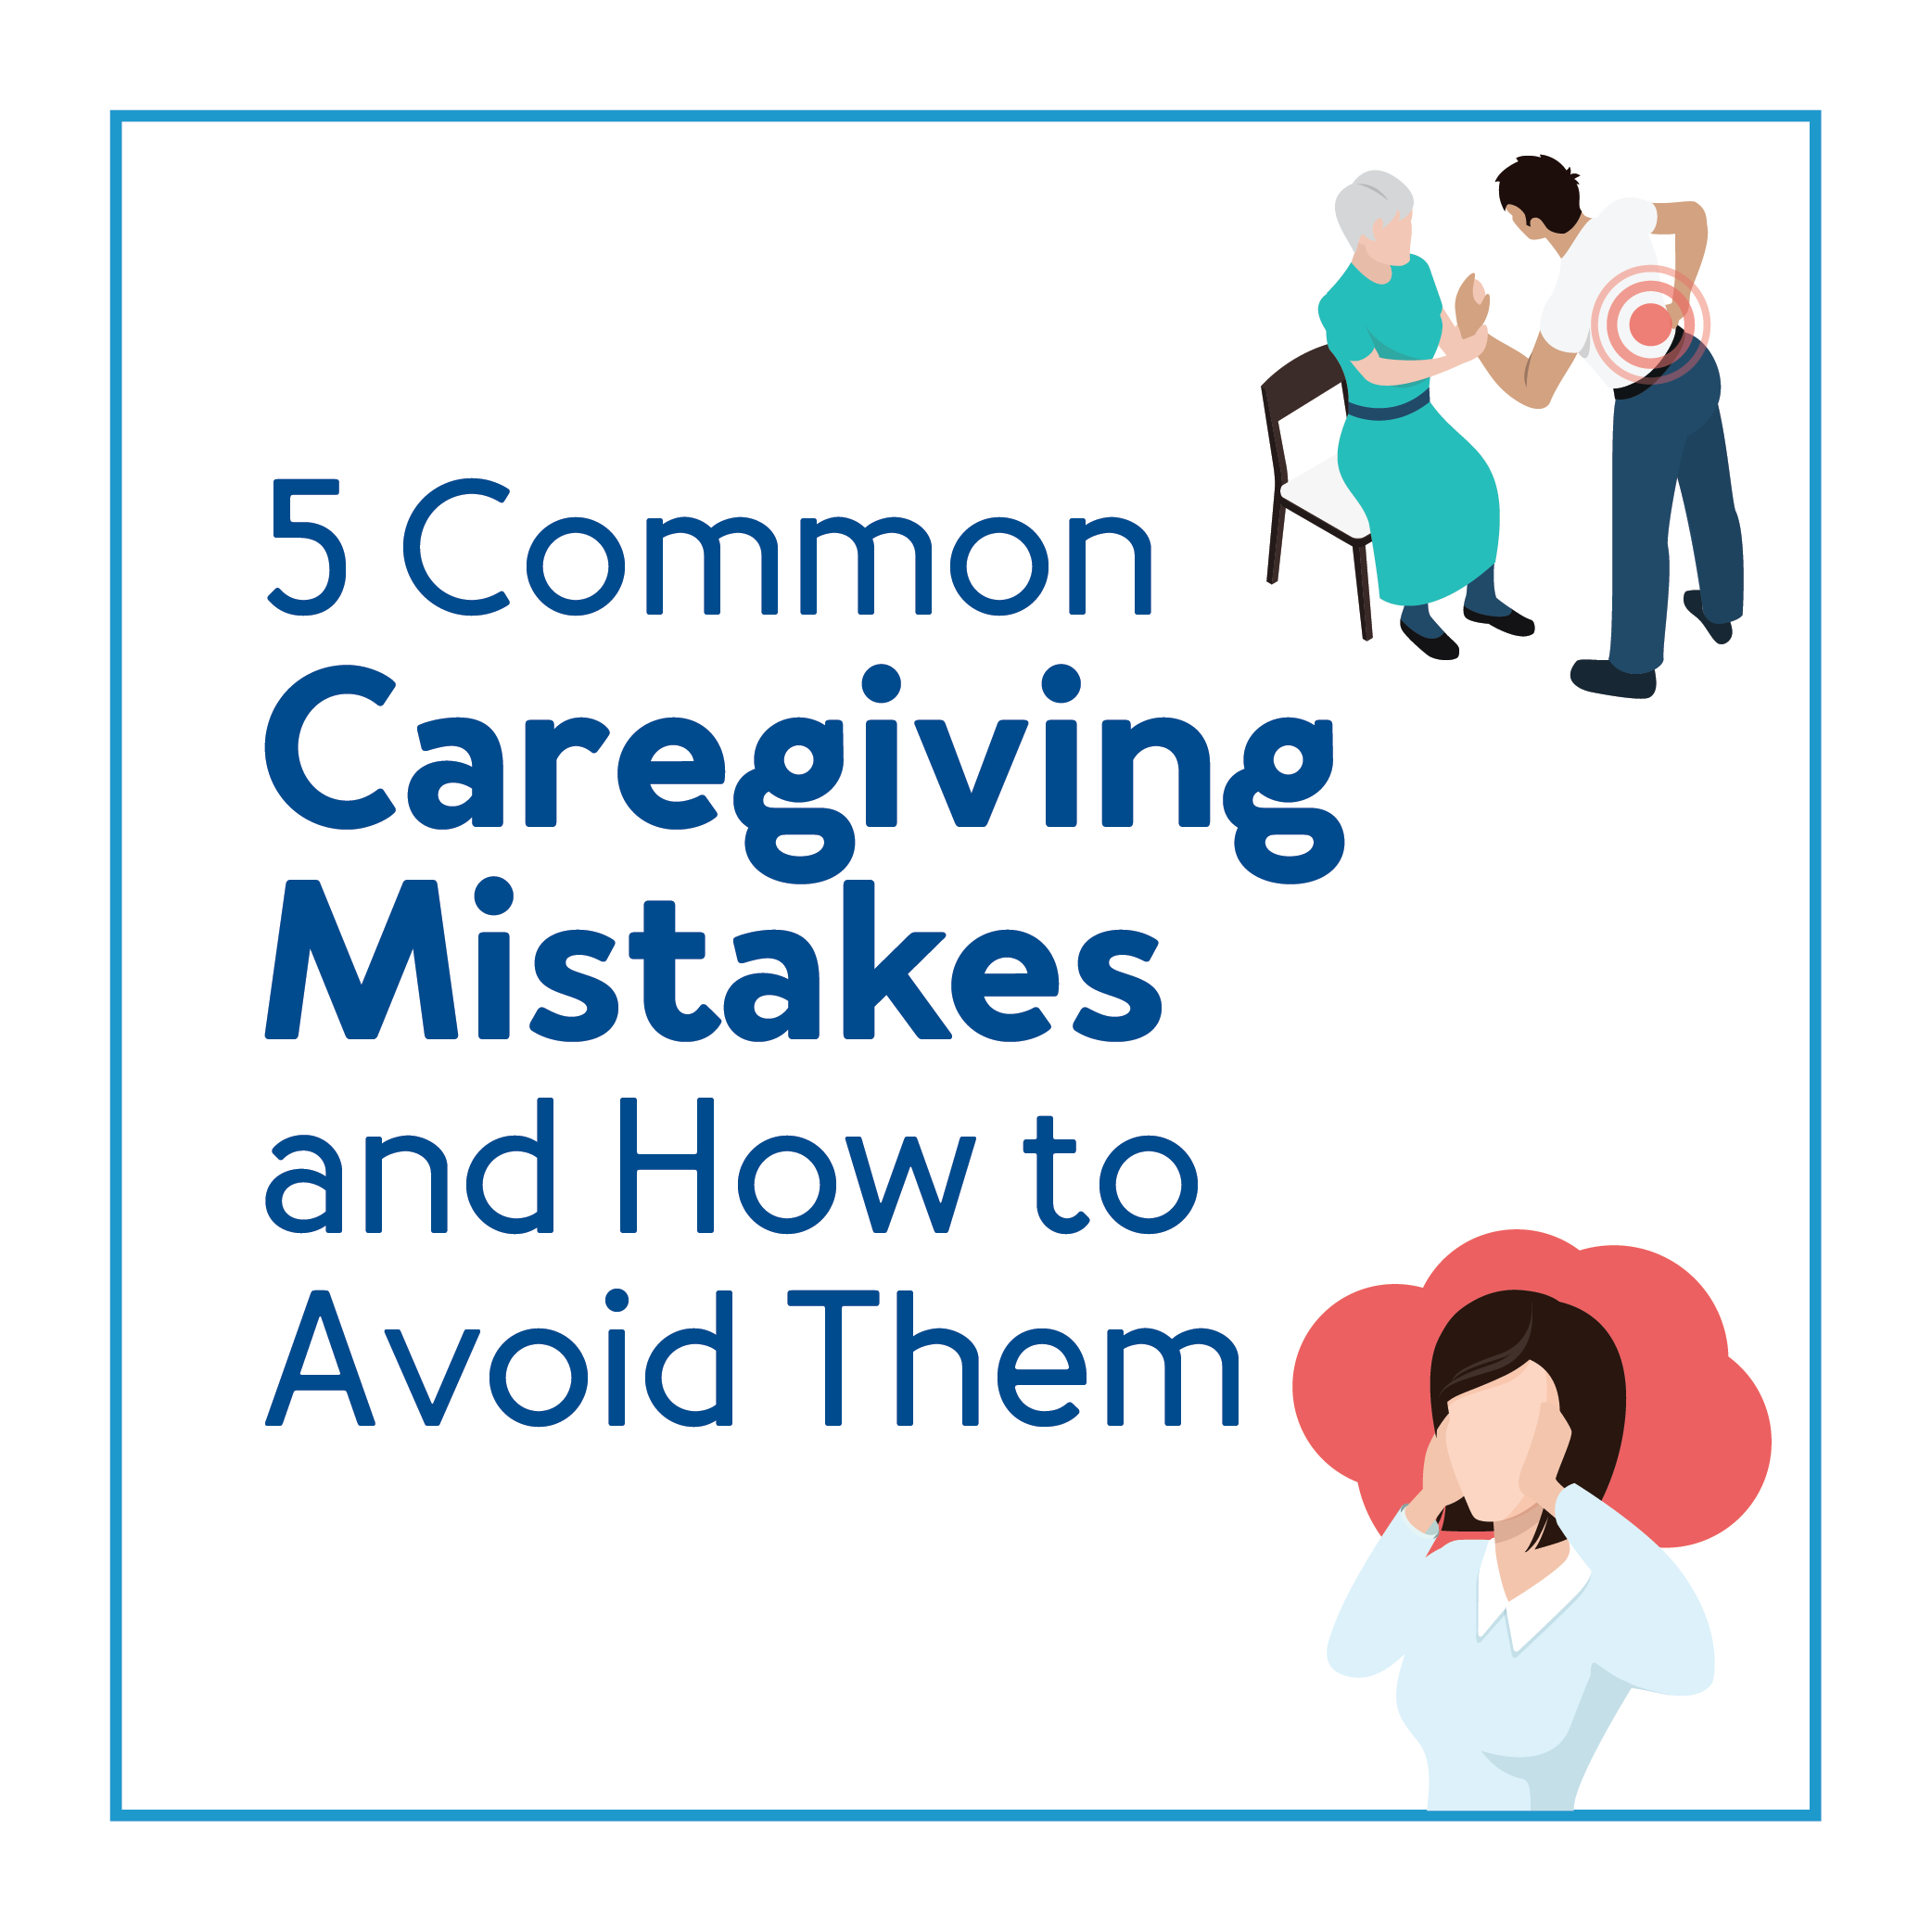 Five Common Caregiving Mistakes and How to Avoid Them